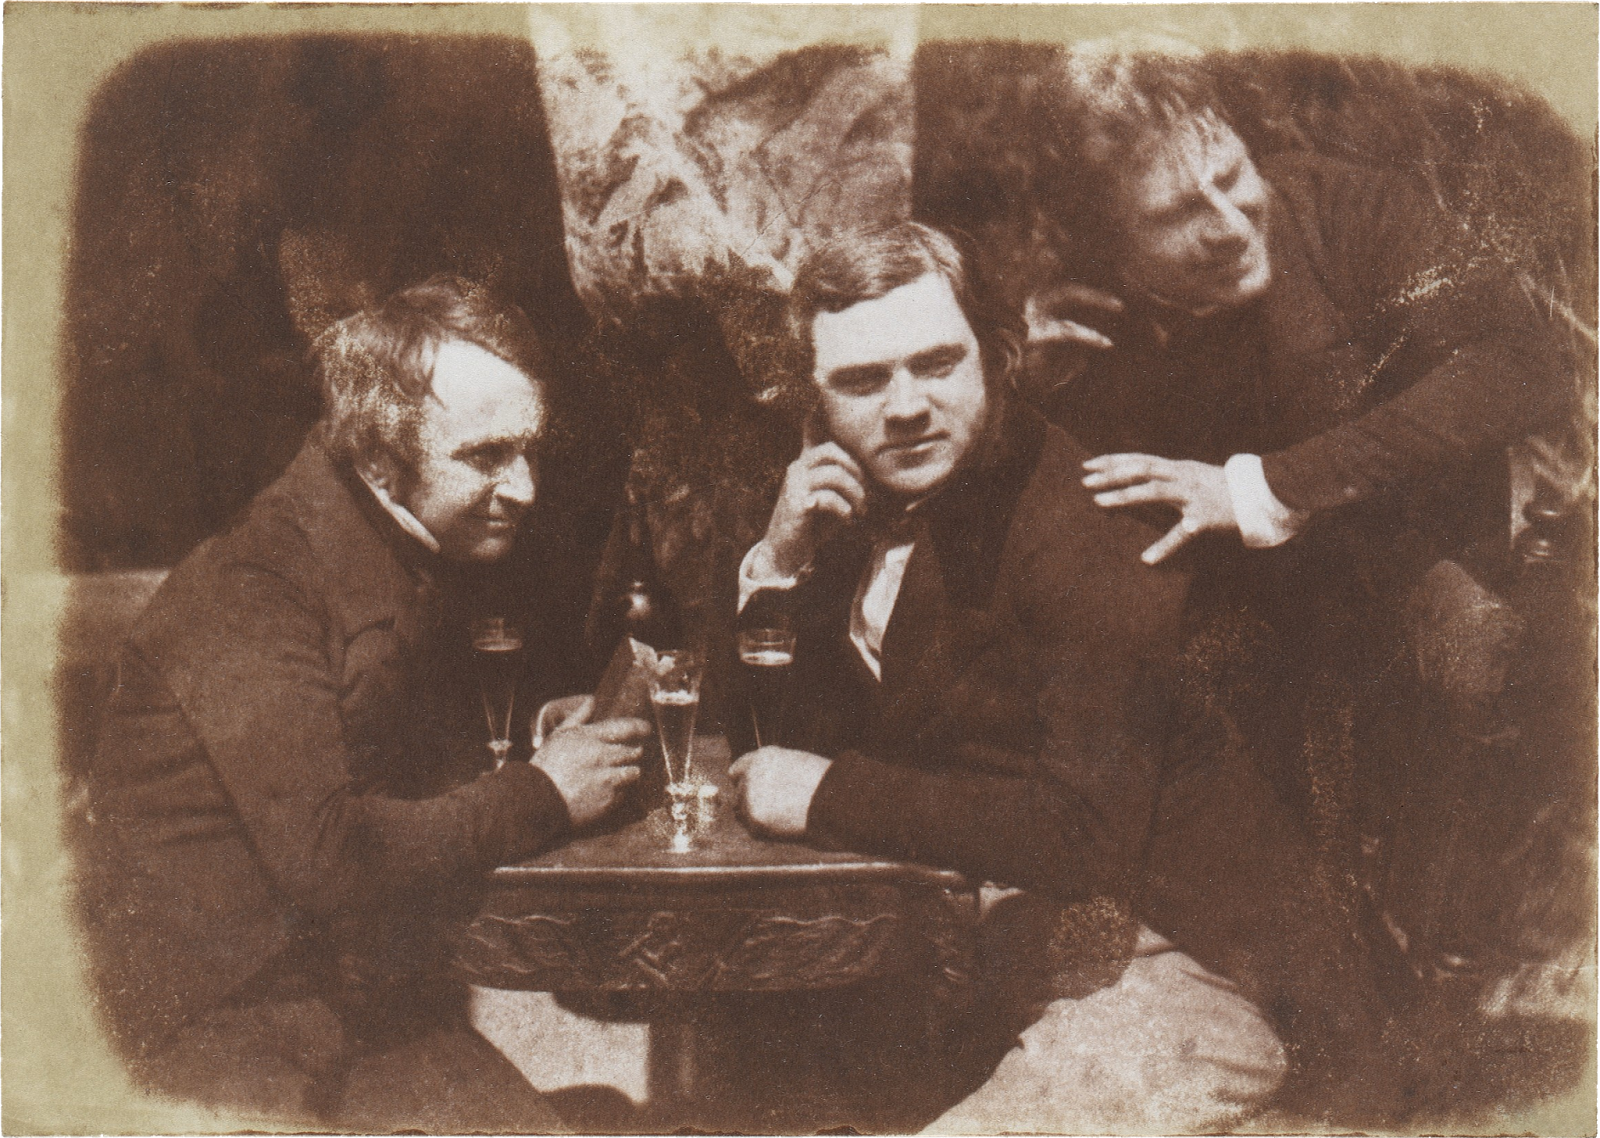 25 Breathtaking Photos From The Past - The earliest known photograph of men drinking beer. Edinburgh Ale, 1844